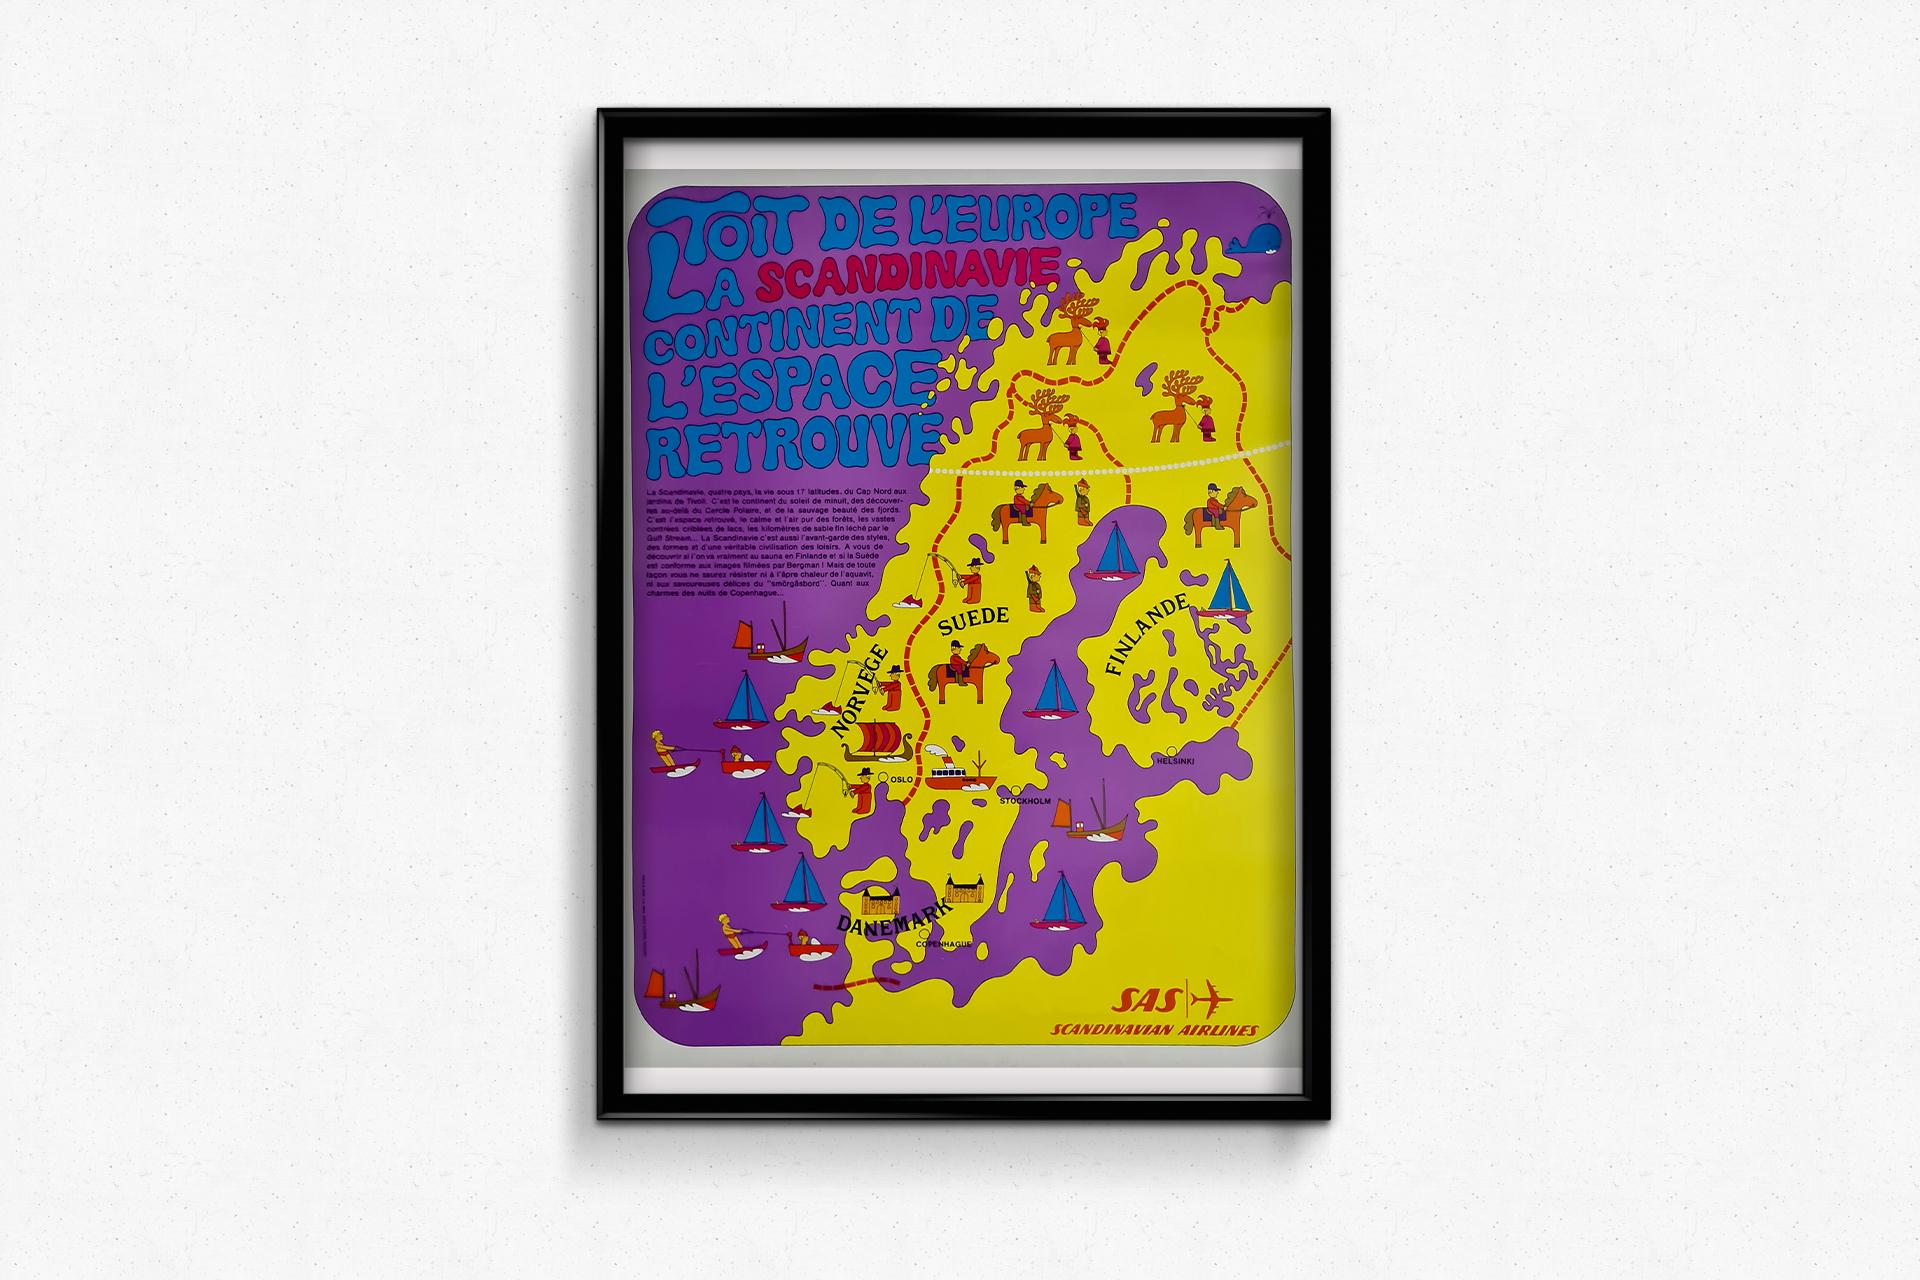 A very nice poster in a psychedelic style. It was made in the 60's, for the airline SAS to promote its travels to Scandinavia.

Airline Company - Tourism - Map

Scandinavian Airlines - Found space continent

Norway - Sweden - Finland -